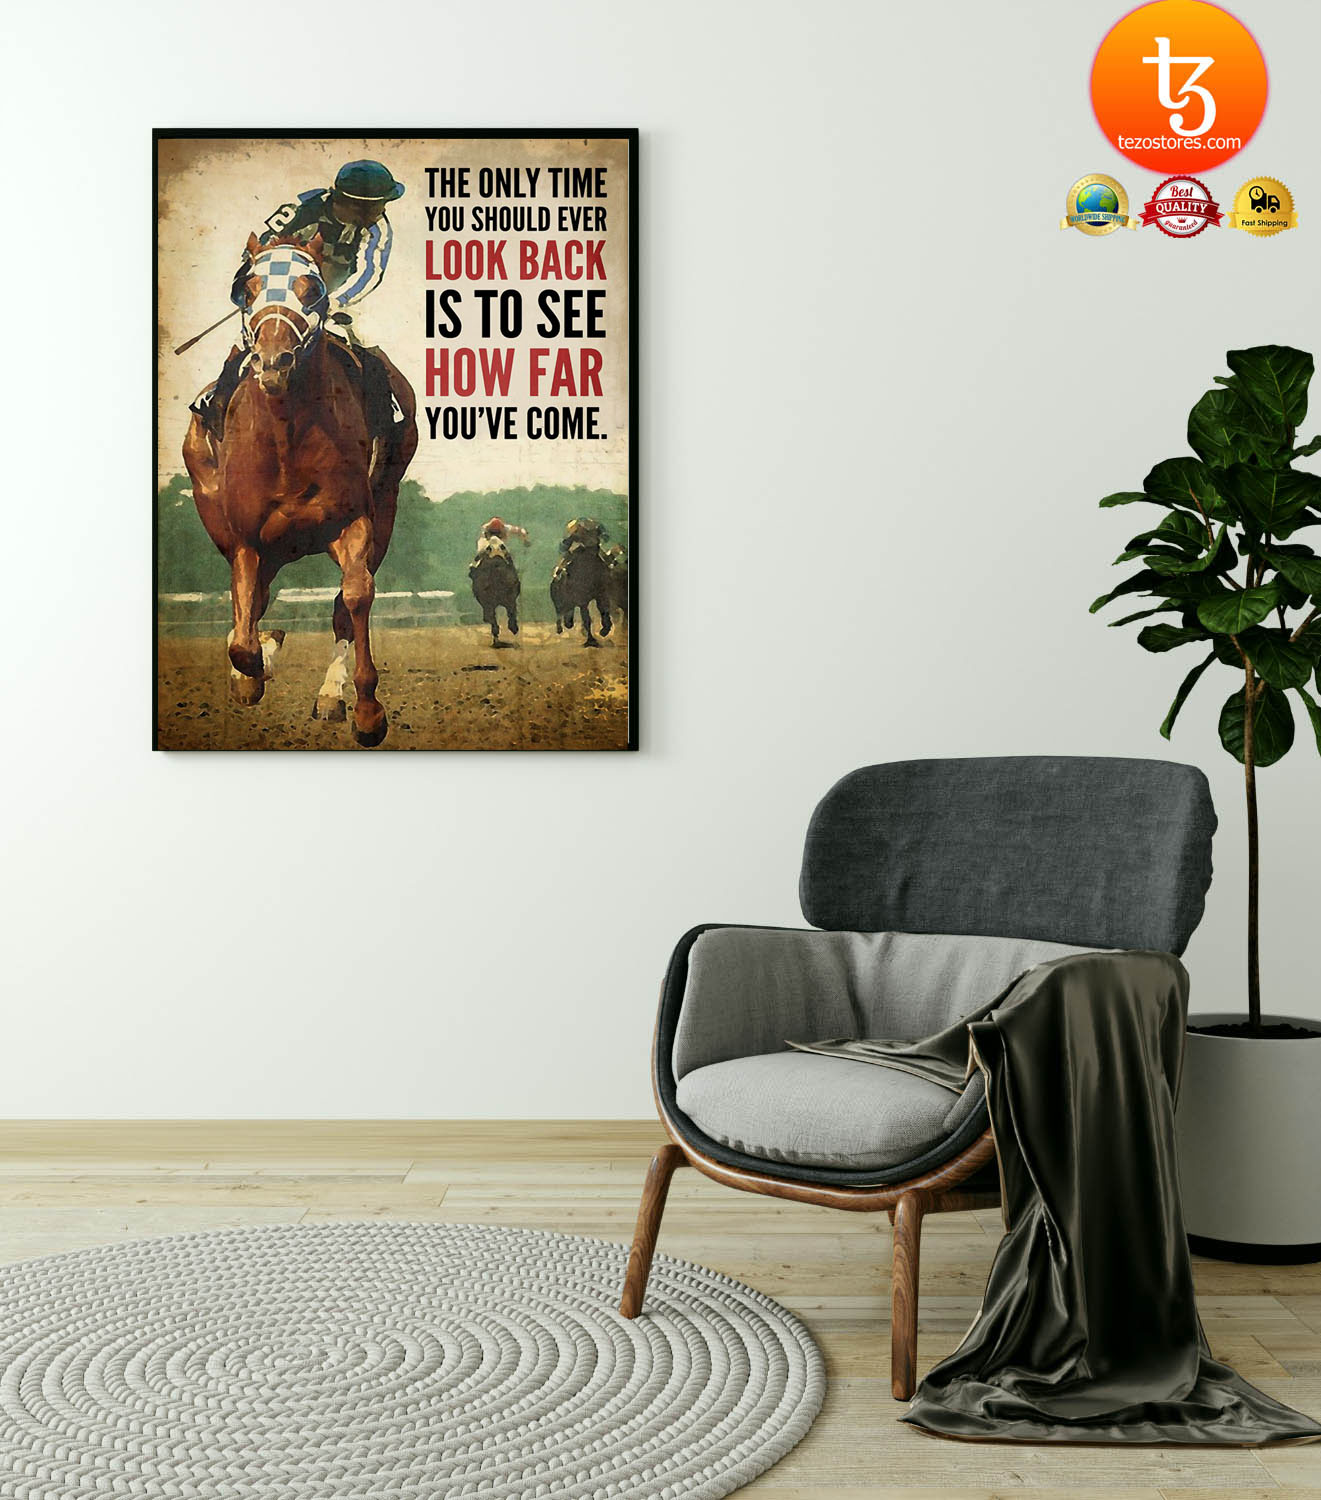 Horse racing The only time you should ever look back is to see how far youve come poster6